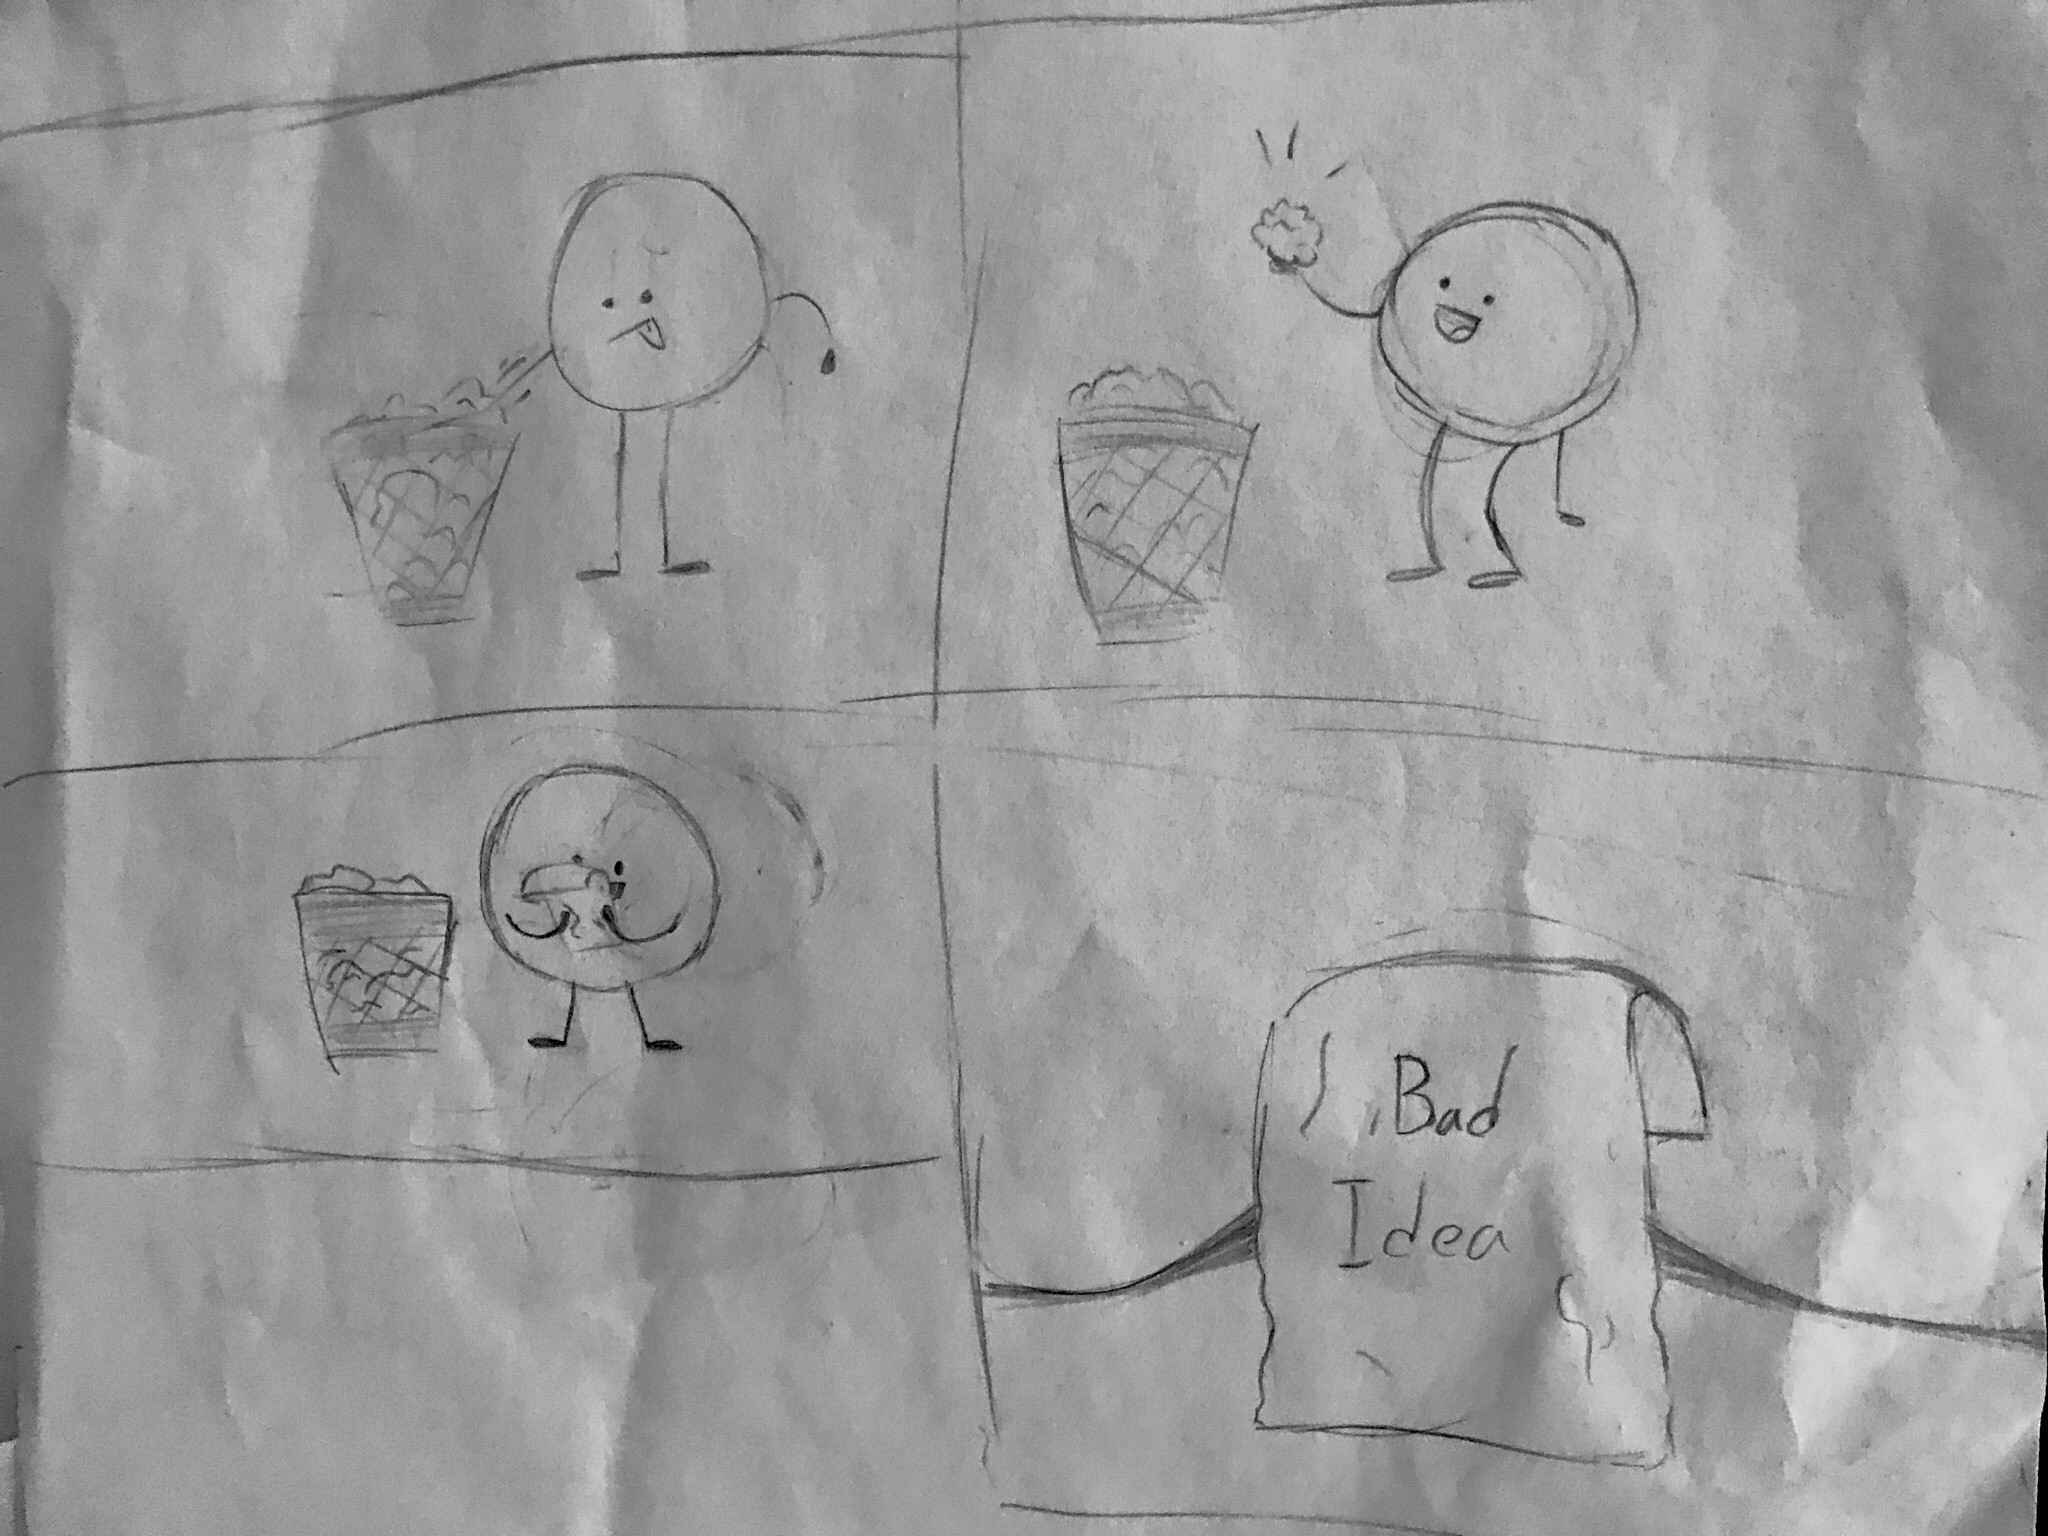 My 11-year-old wants to start a webcomic. Here’s his first one.